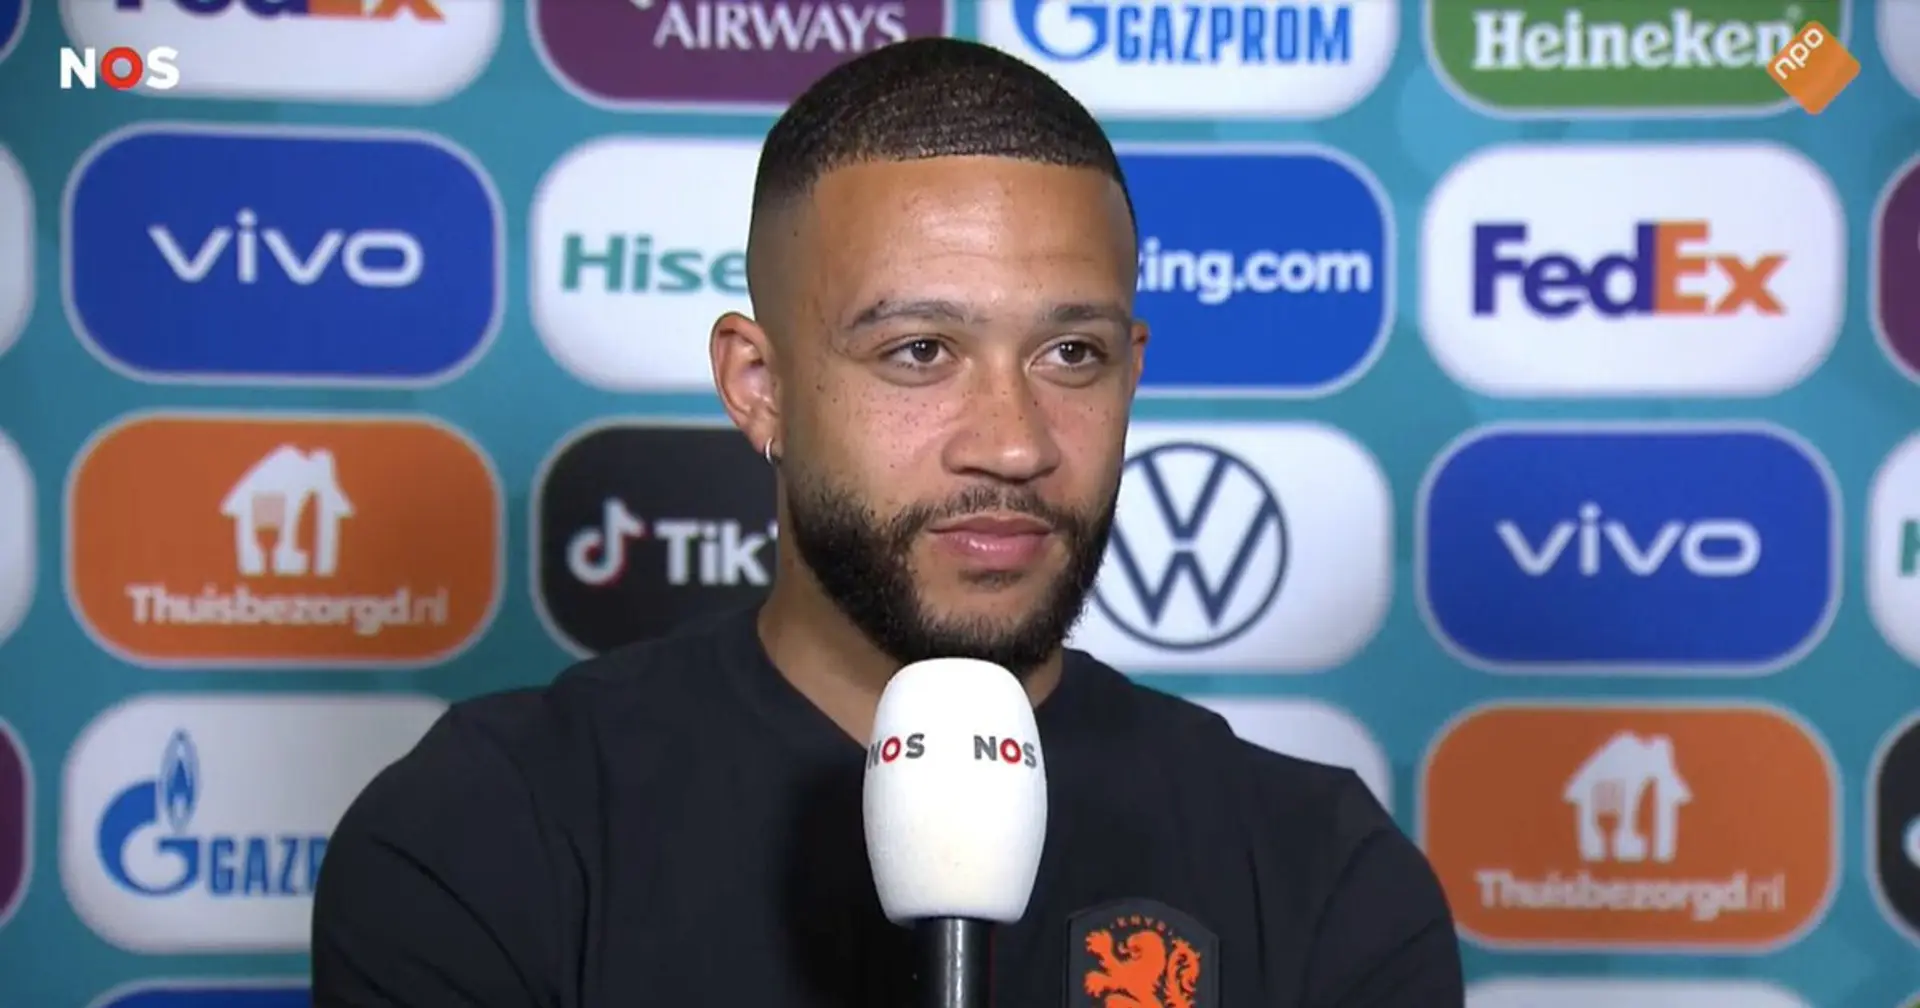 'A big step forward in my career': Depay opens up on Barca move